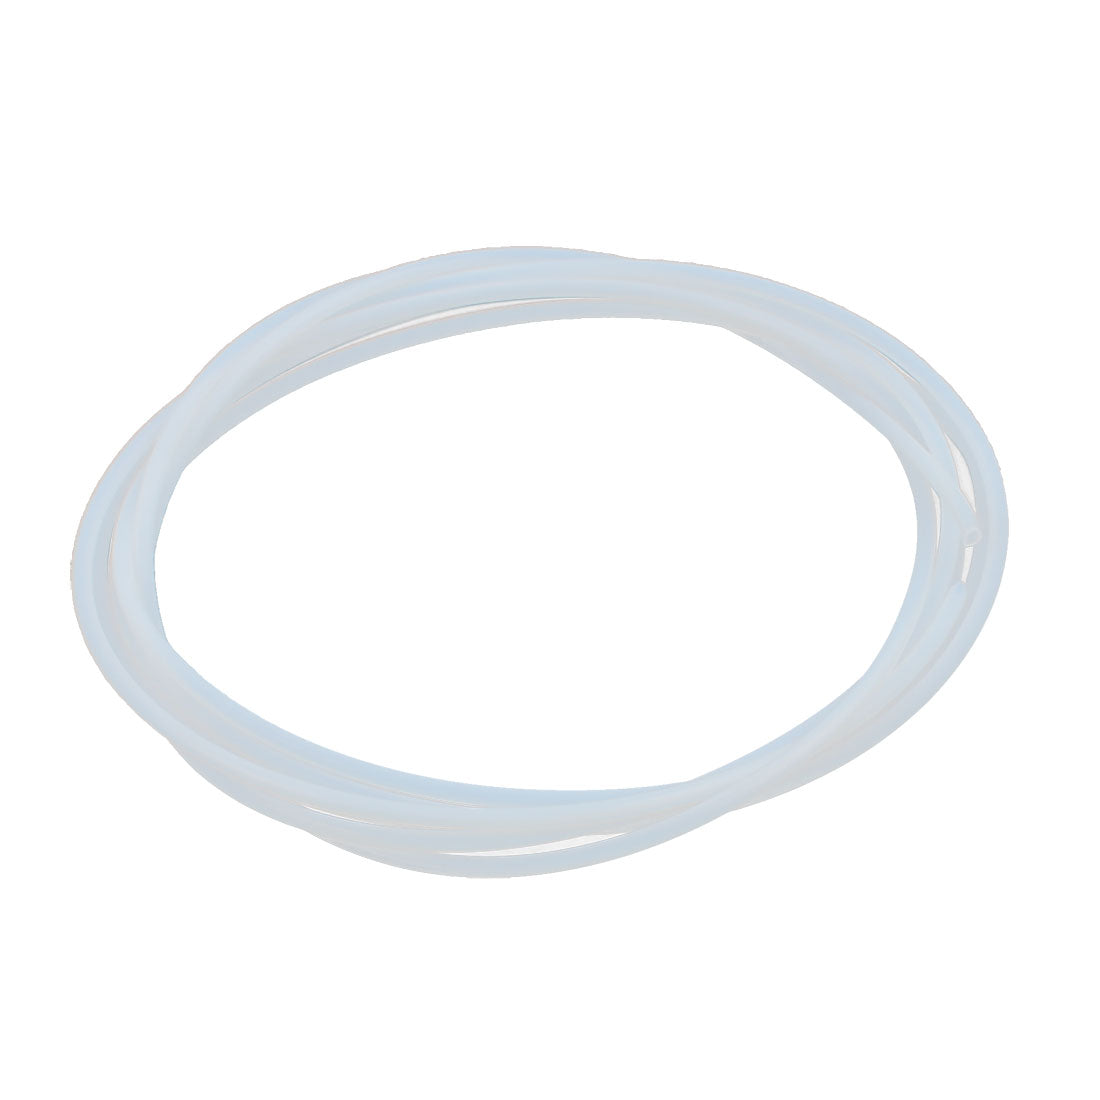 uxcell Uxcell 1.8mm x 2.6mm PTFE High Lubricating Ability Tubing 2 Meters 6.6Ft for Electronics